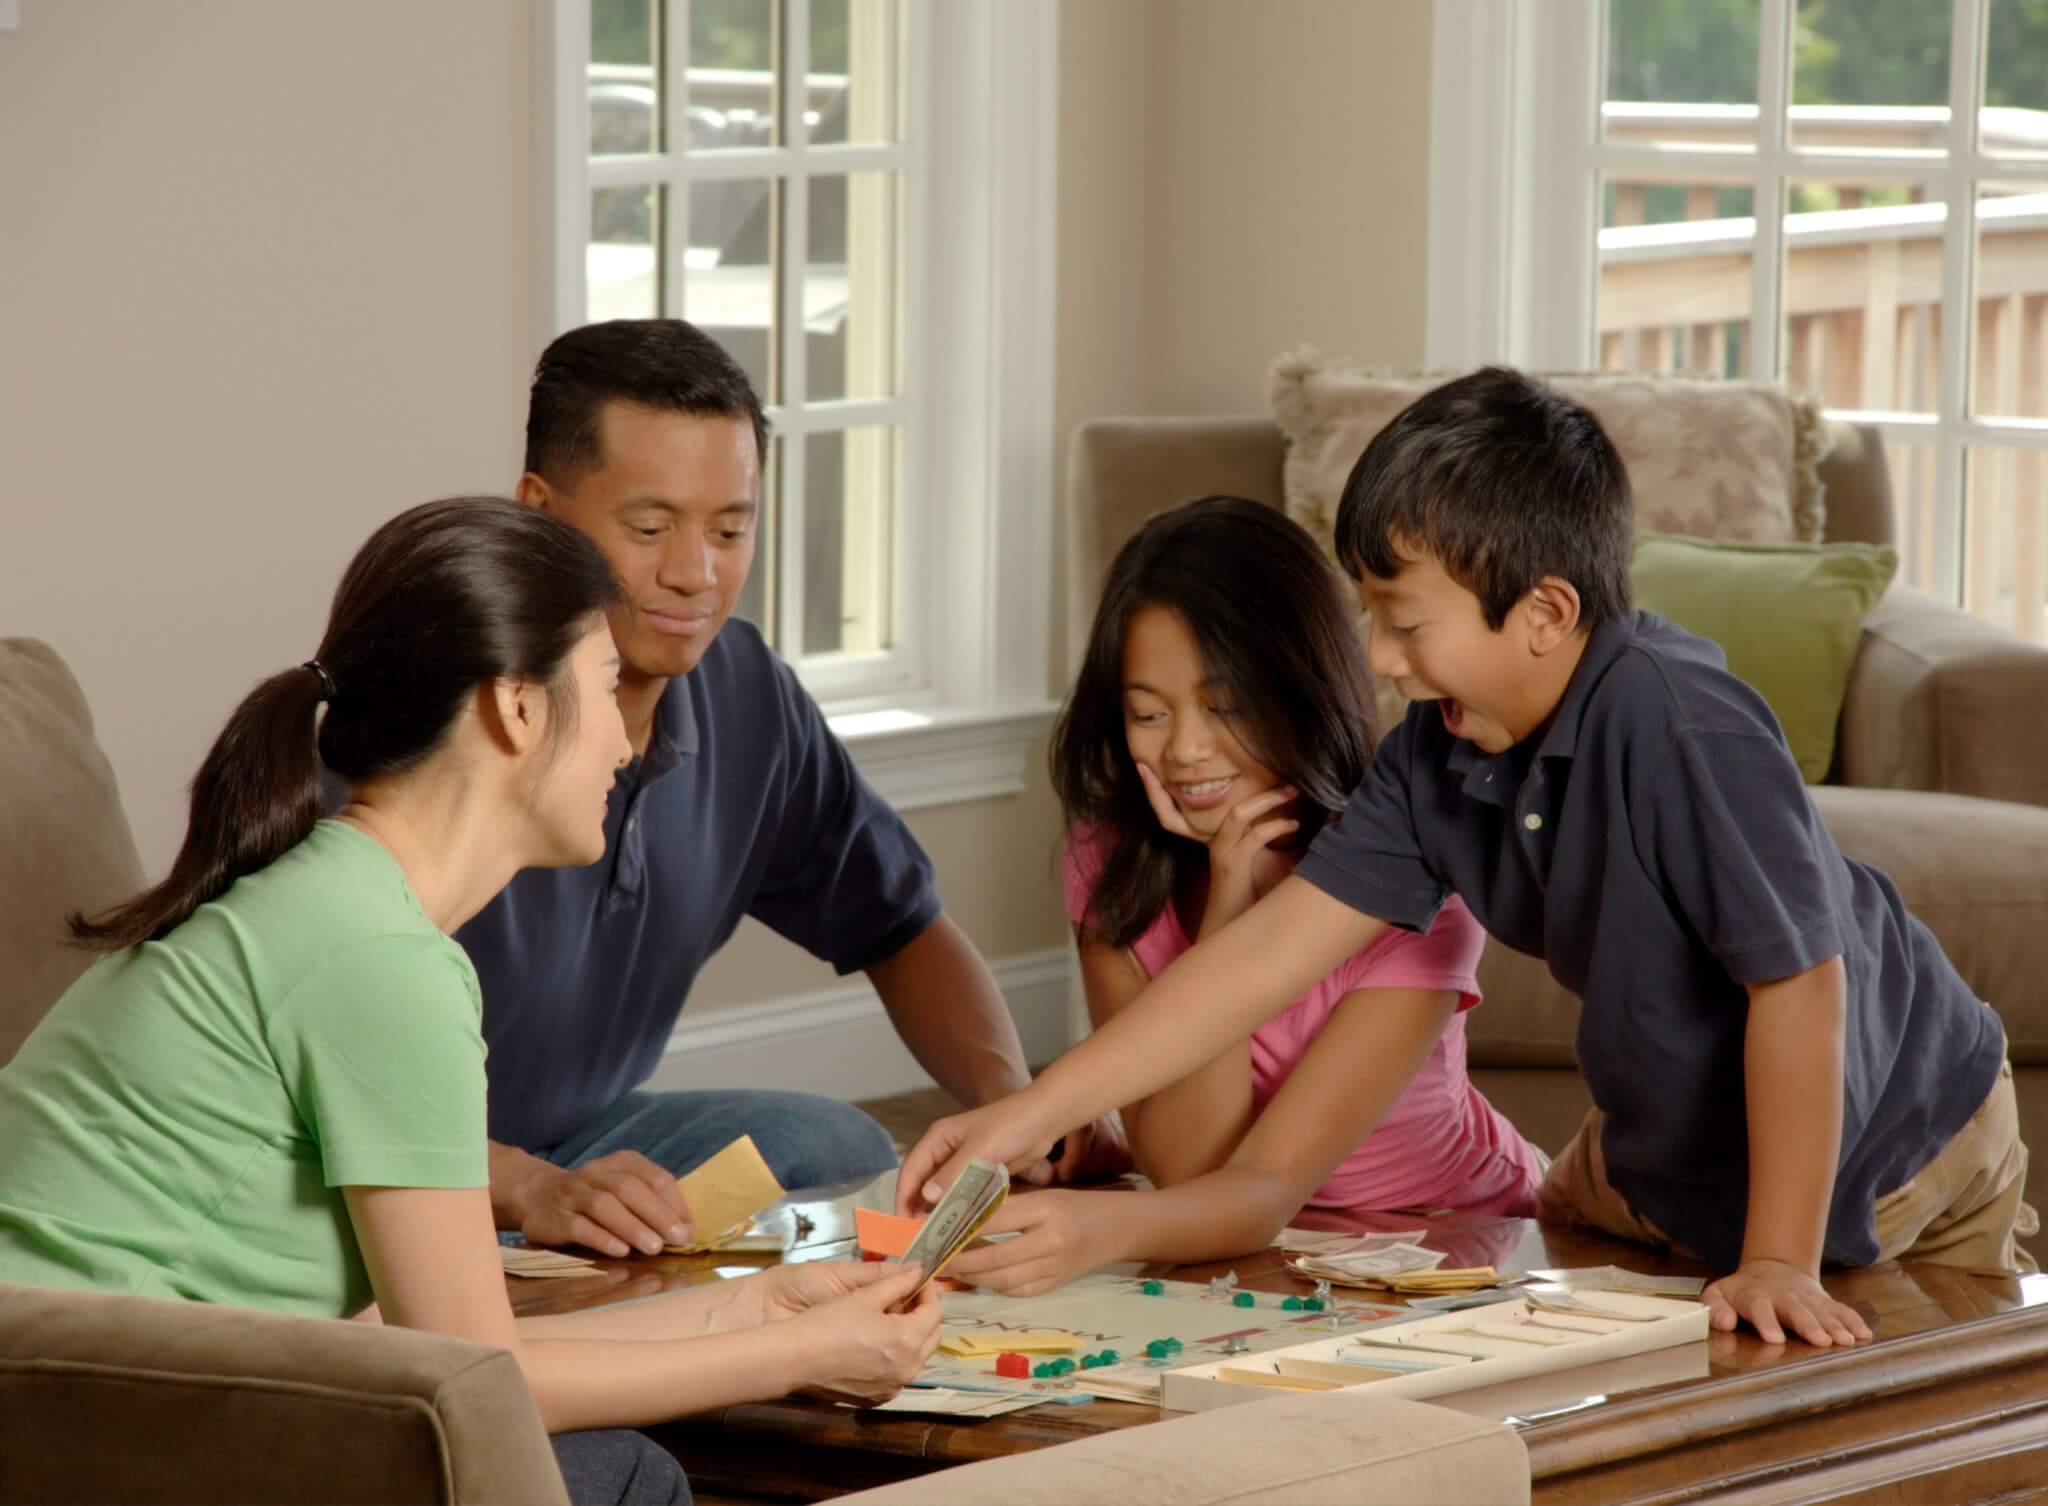 A family playing a board game and smiling around a coffee table in a bright and neutral-colored living room.